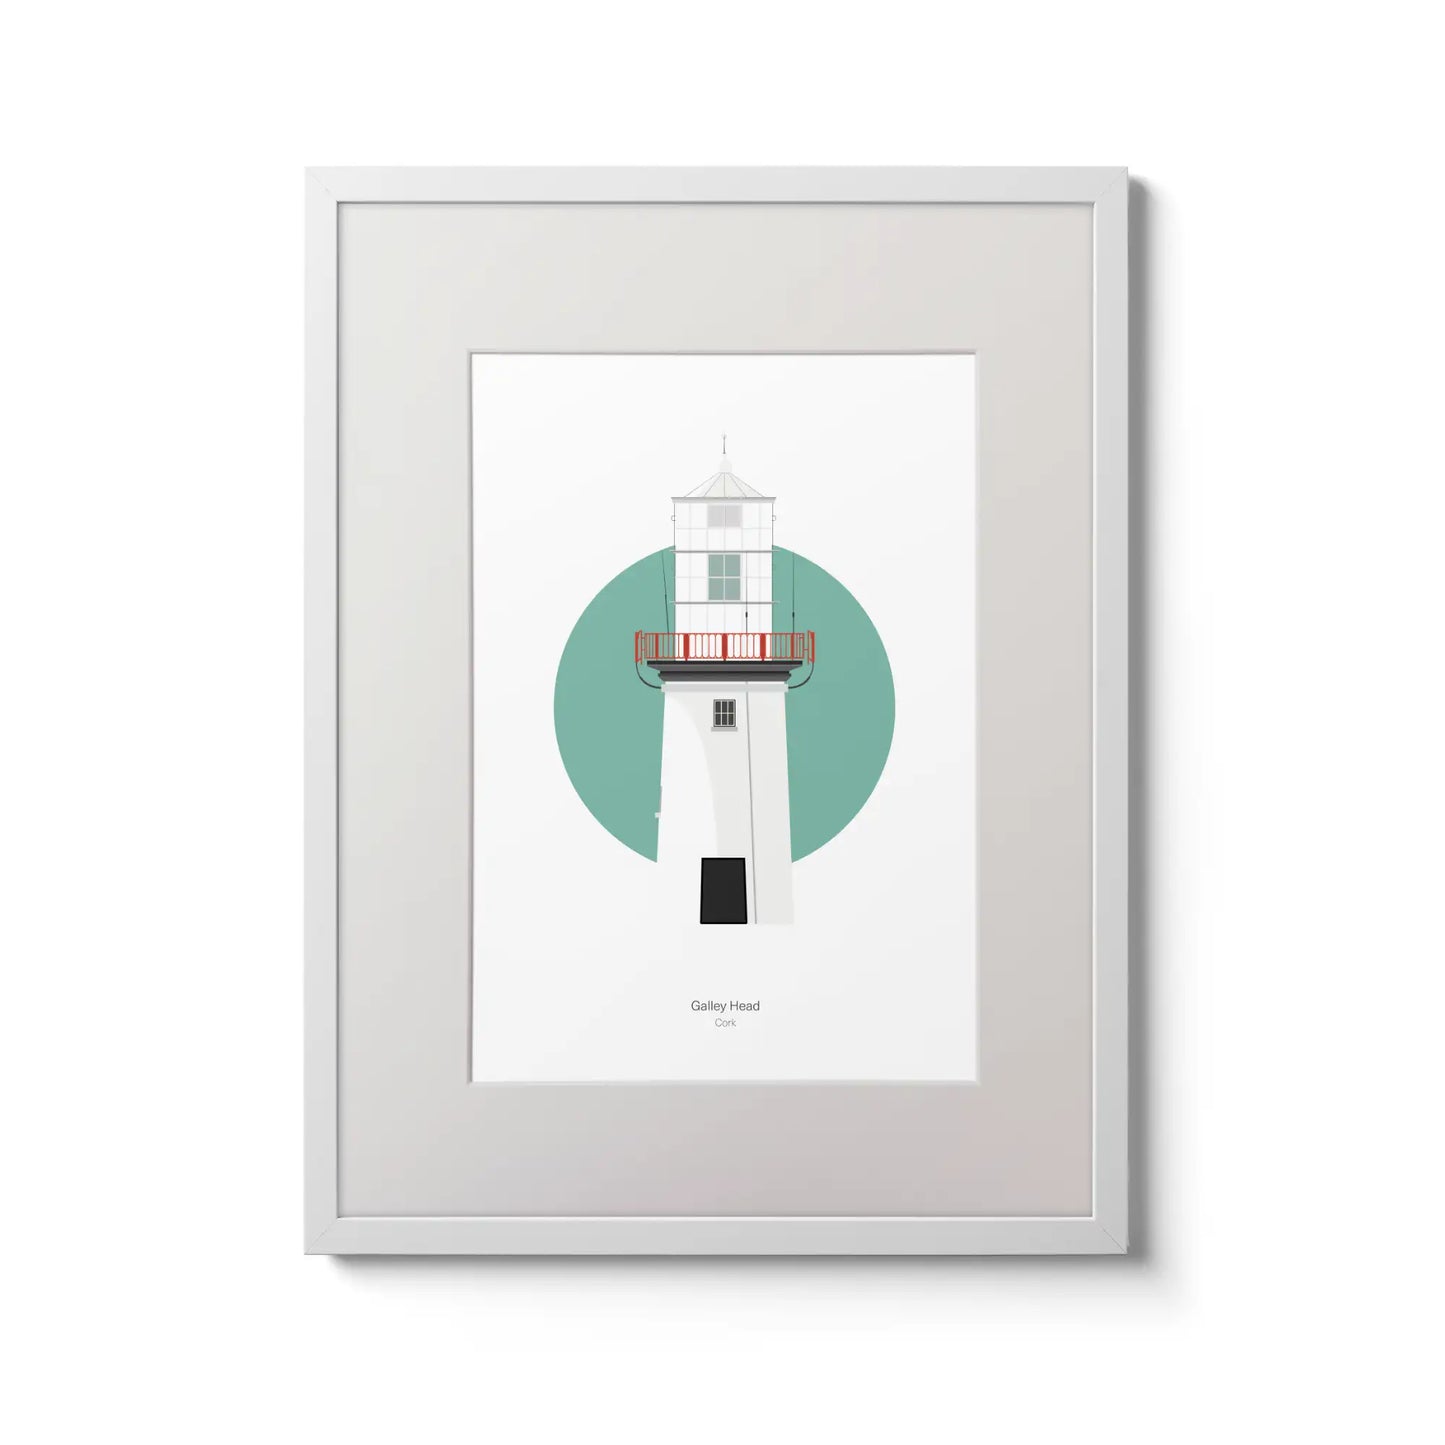 Illustration of Galley Head lighthouse on a white background inside light blue square,  in a white frame measuring 30x40cm.